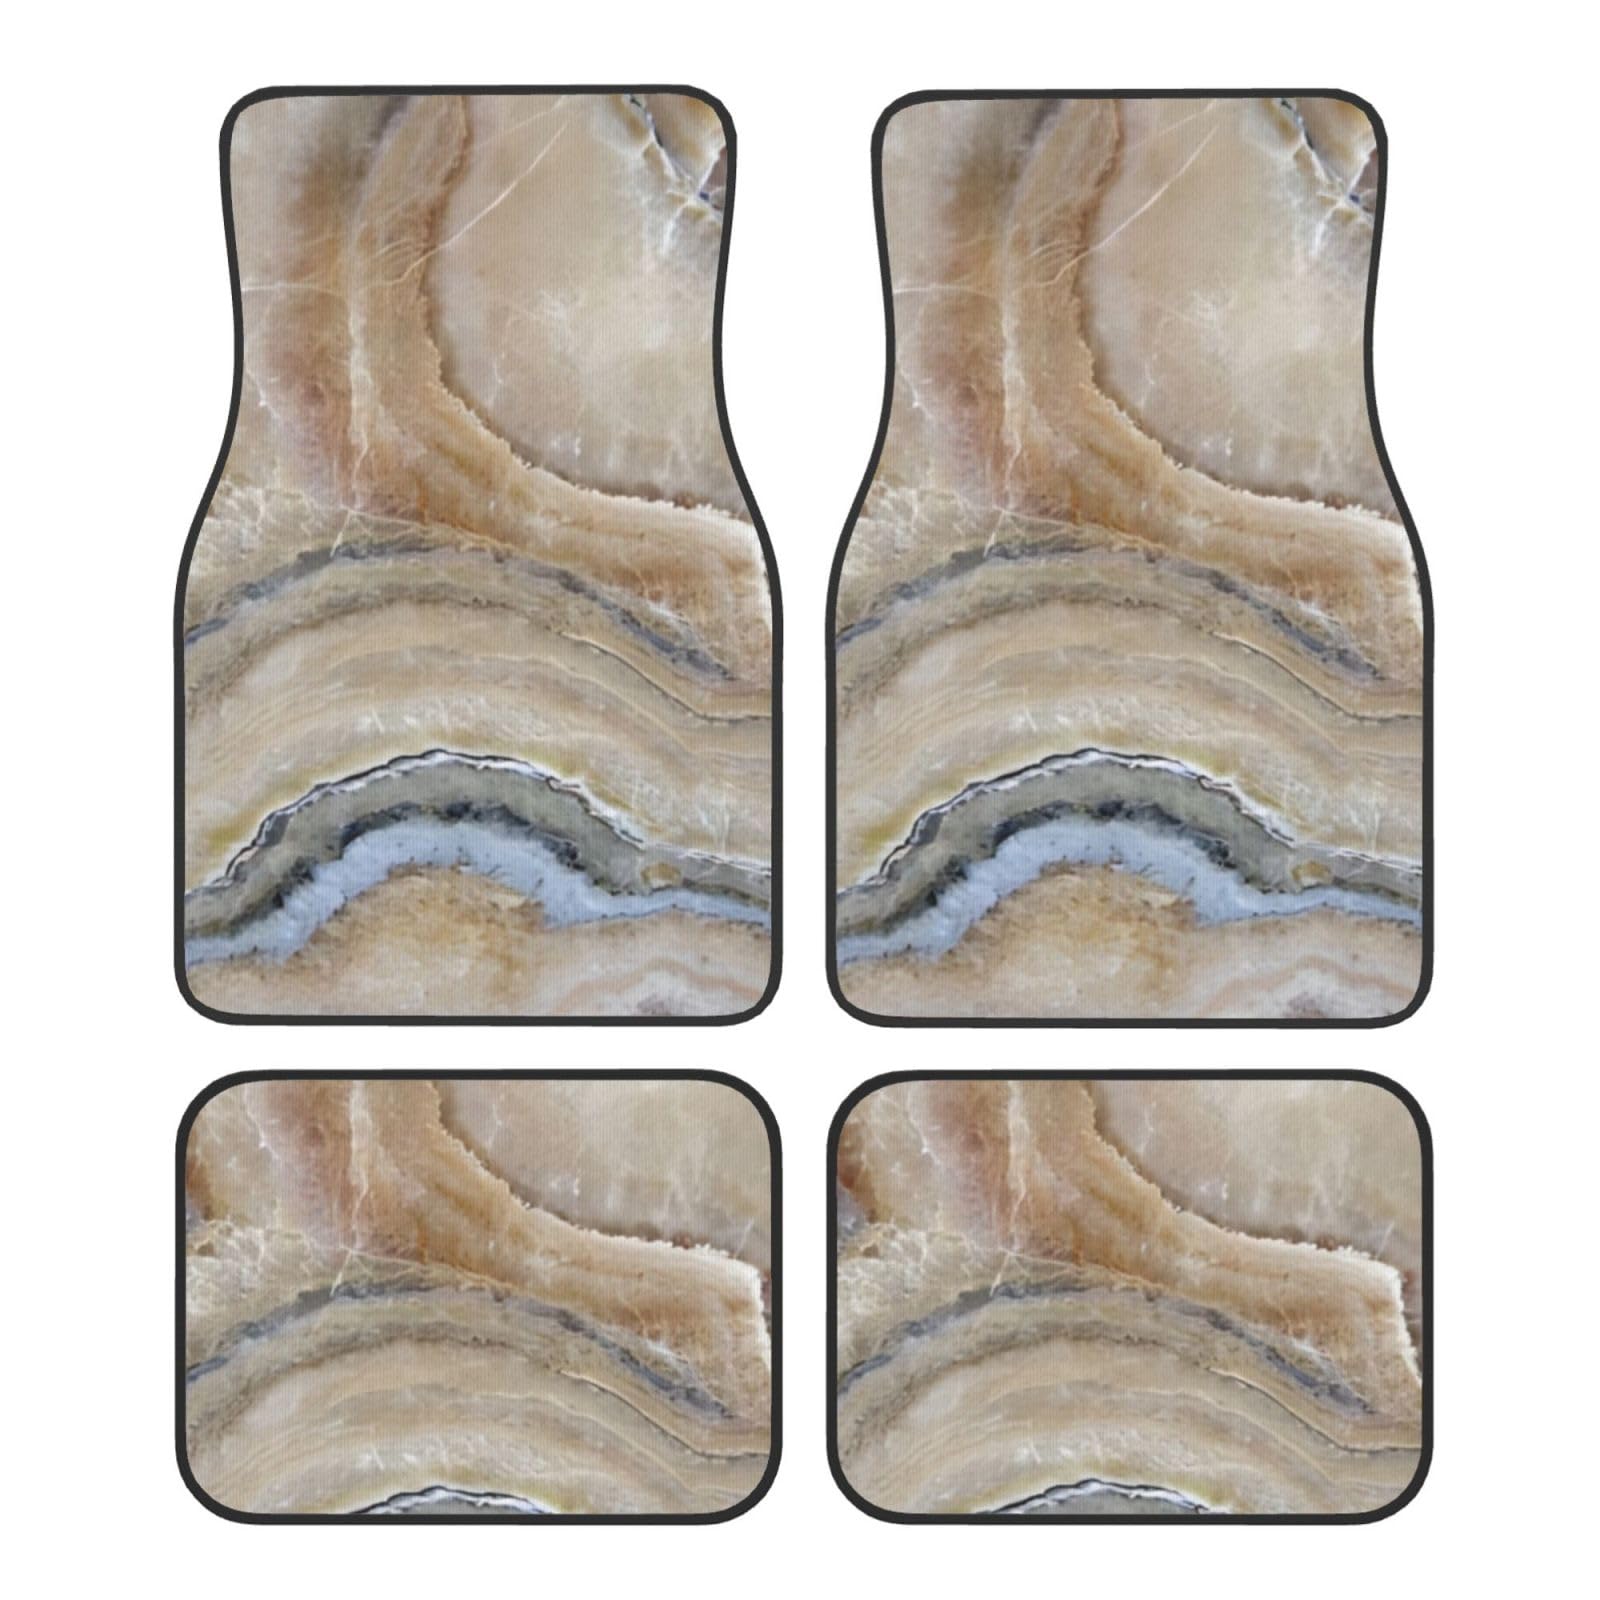 IDETECTOR Onyx Stone Pale Blue Printed Car Foot Mat Set Of 4 Pieces Universal Car Floor Mats Car Decoration Accessories von IDETECTOR